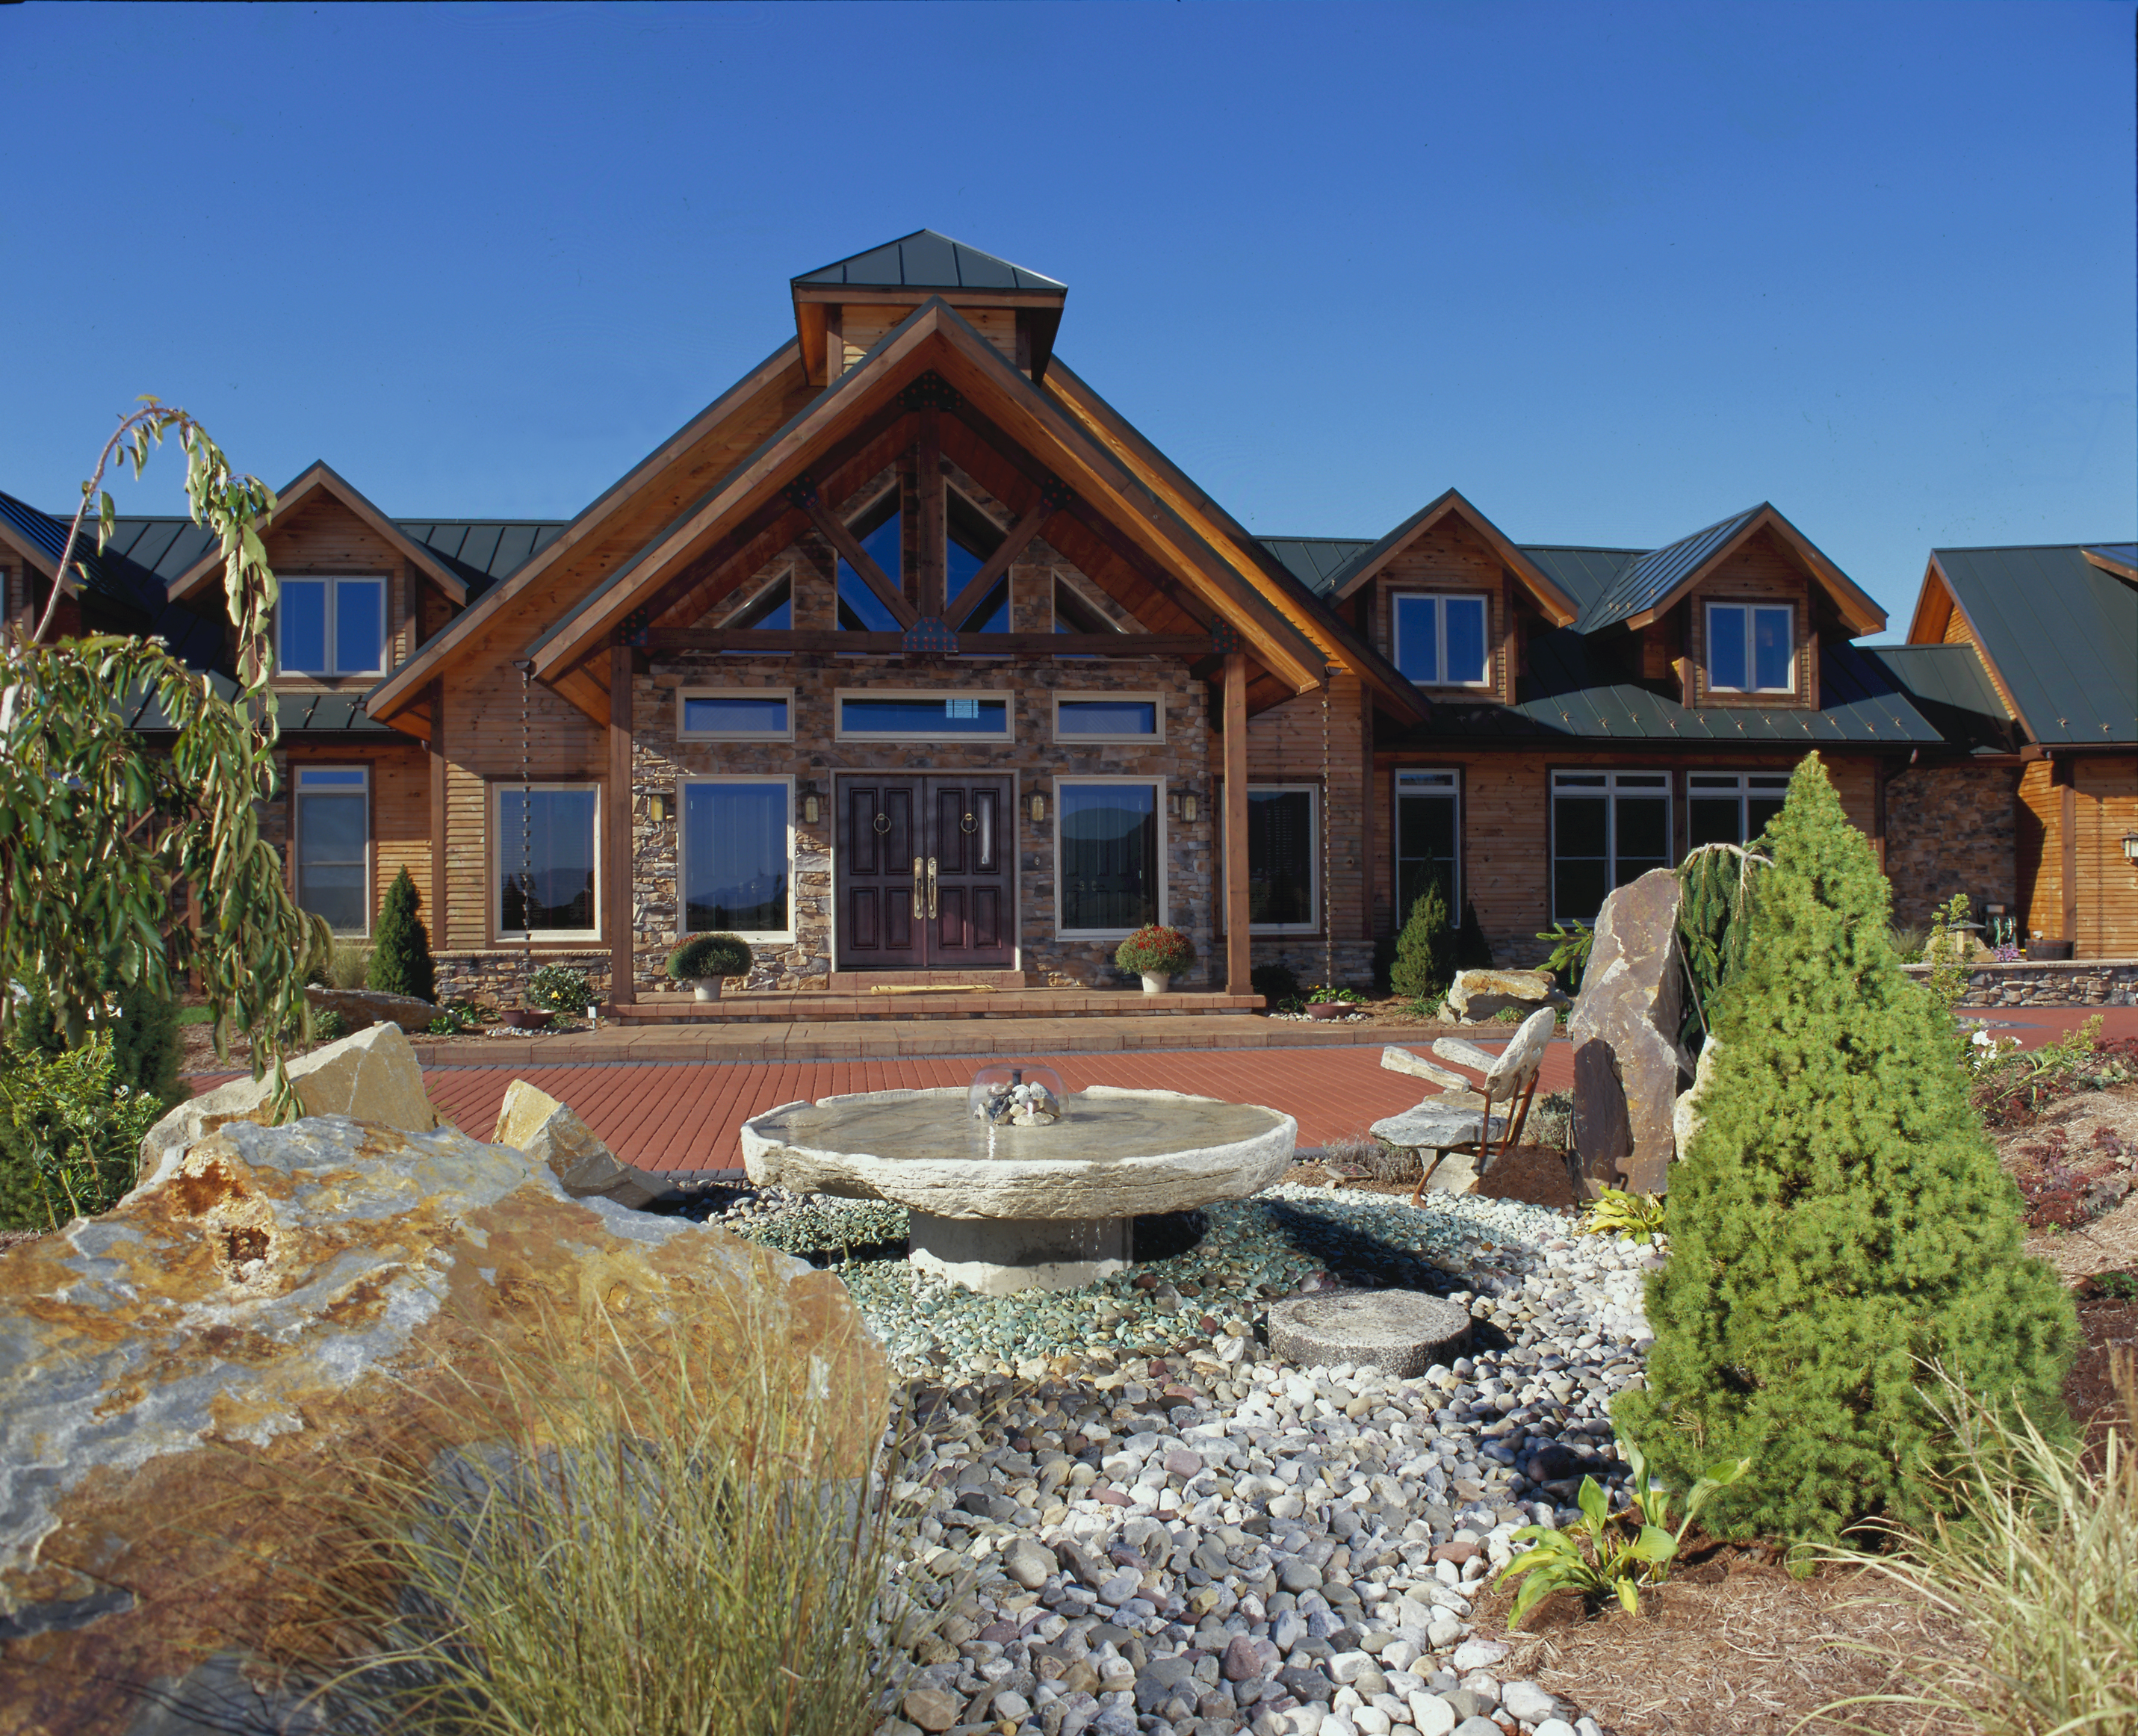 Landscaping Ideas For Log Homes - Image to u